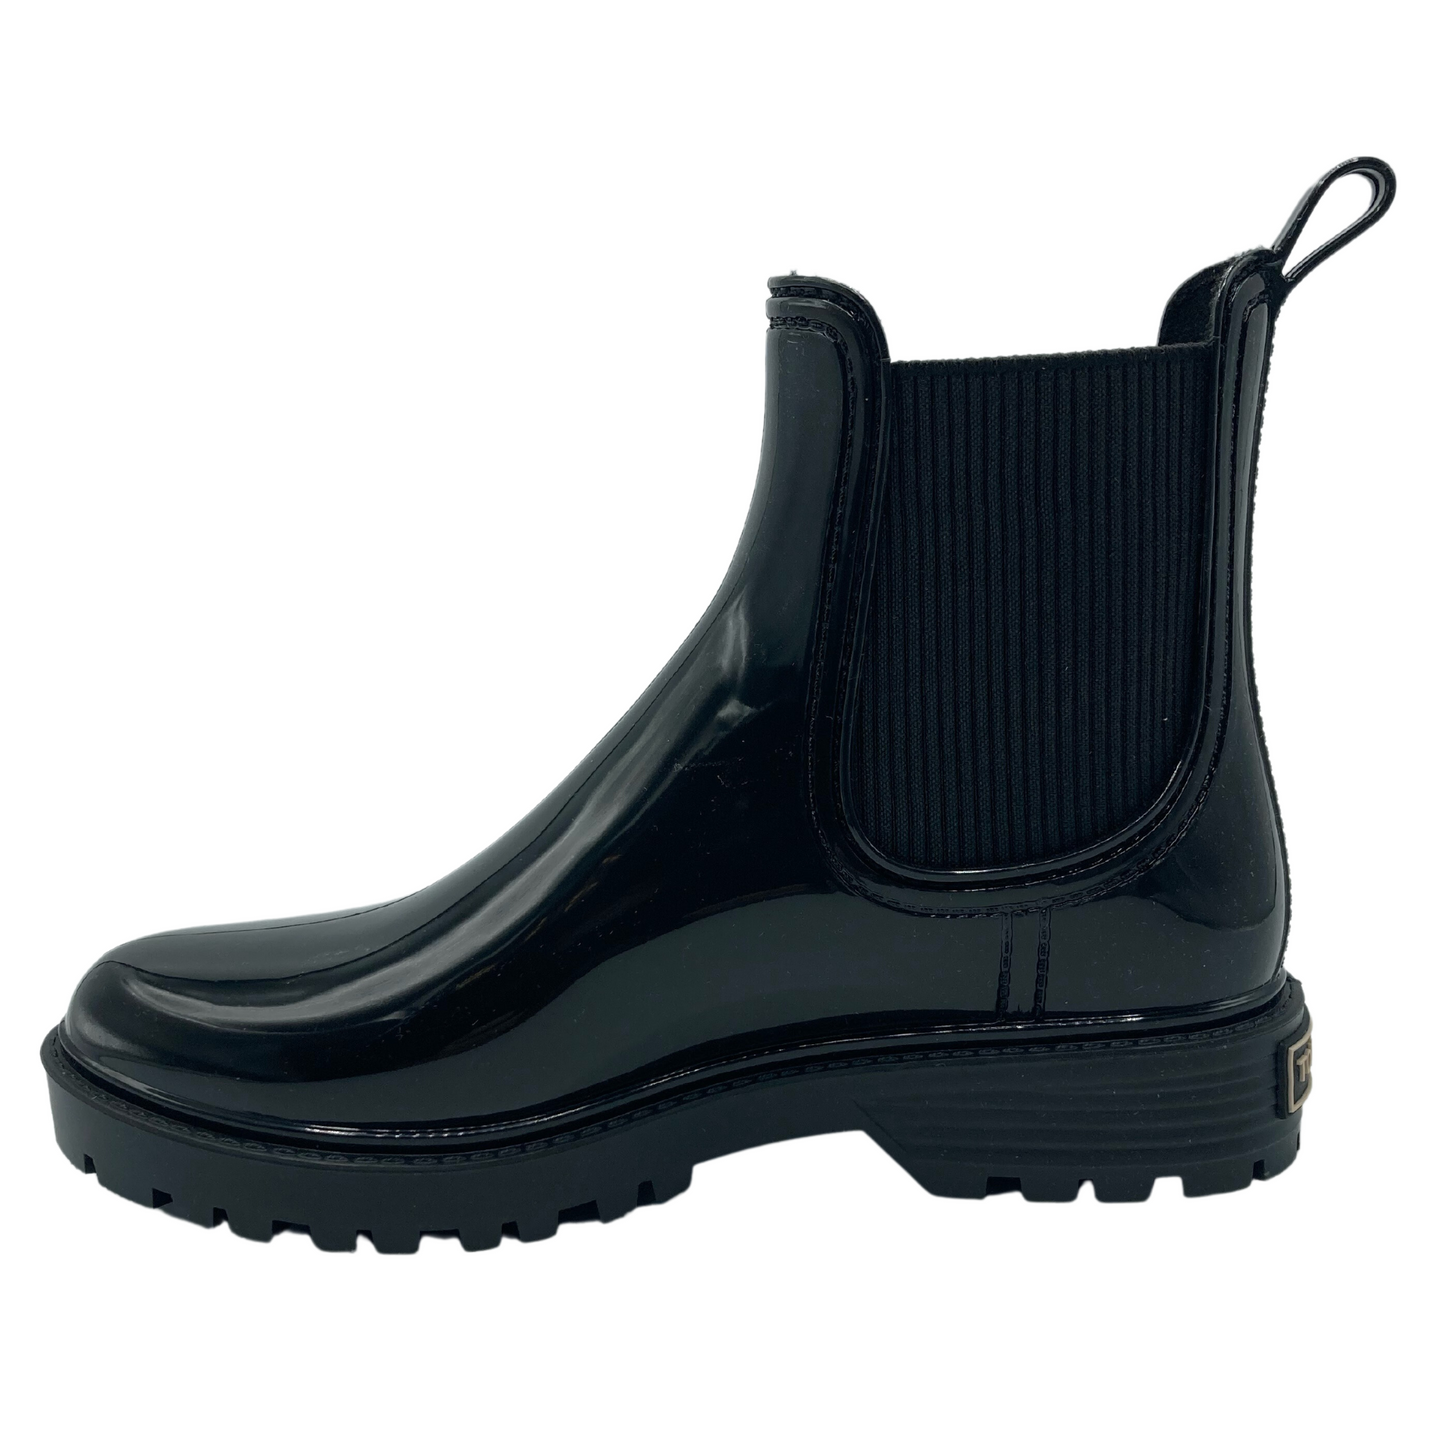 Left facing view of glossy black short boot with black rubber outsole